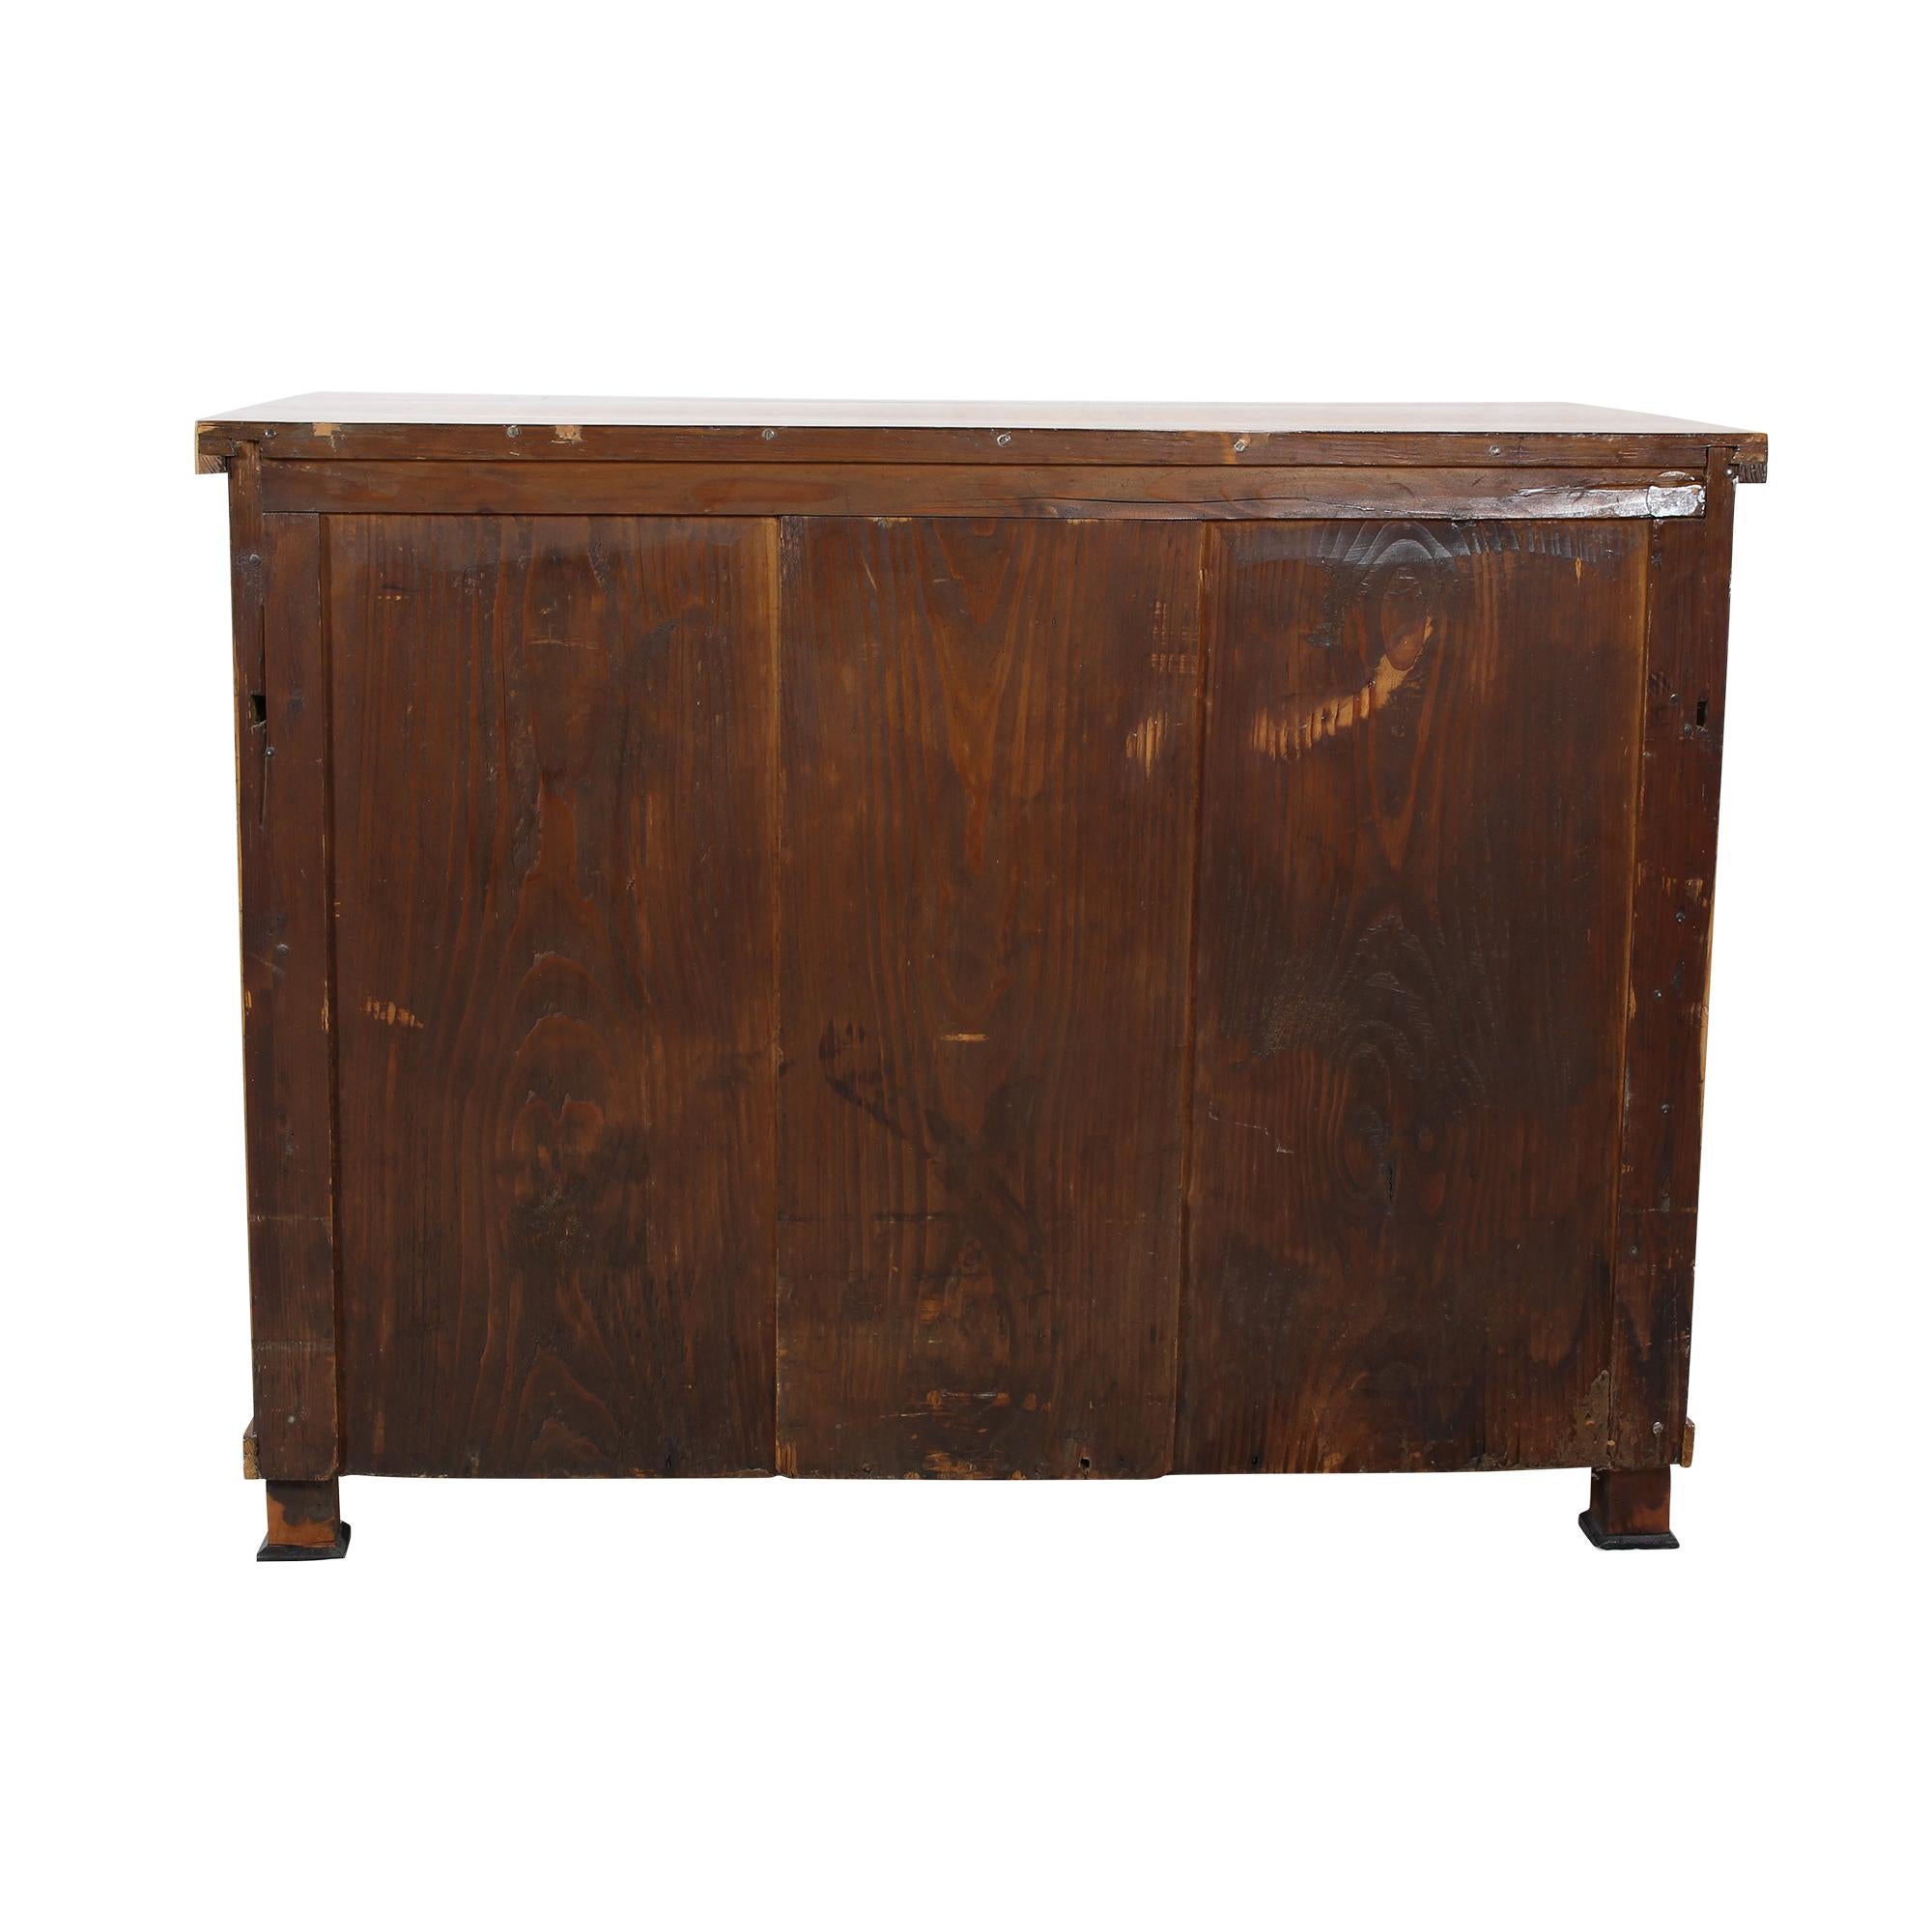 Polished Early 19th Century Biedermeier Cherrywood Half Cabinet or Commode